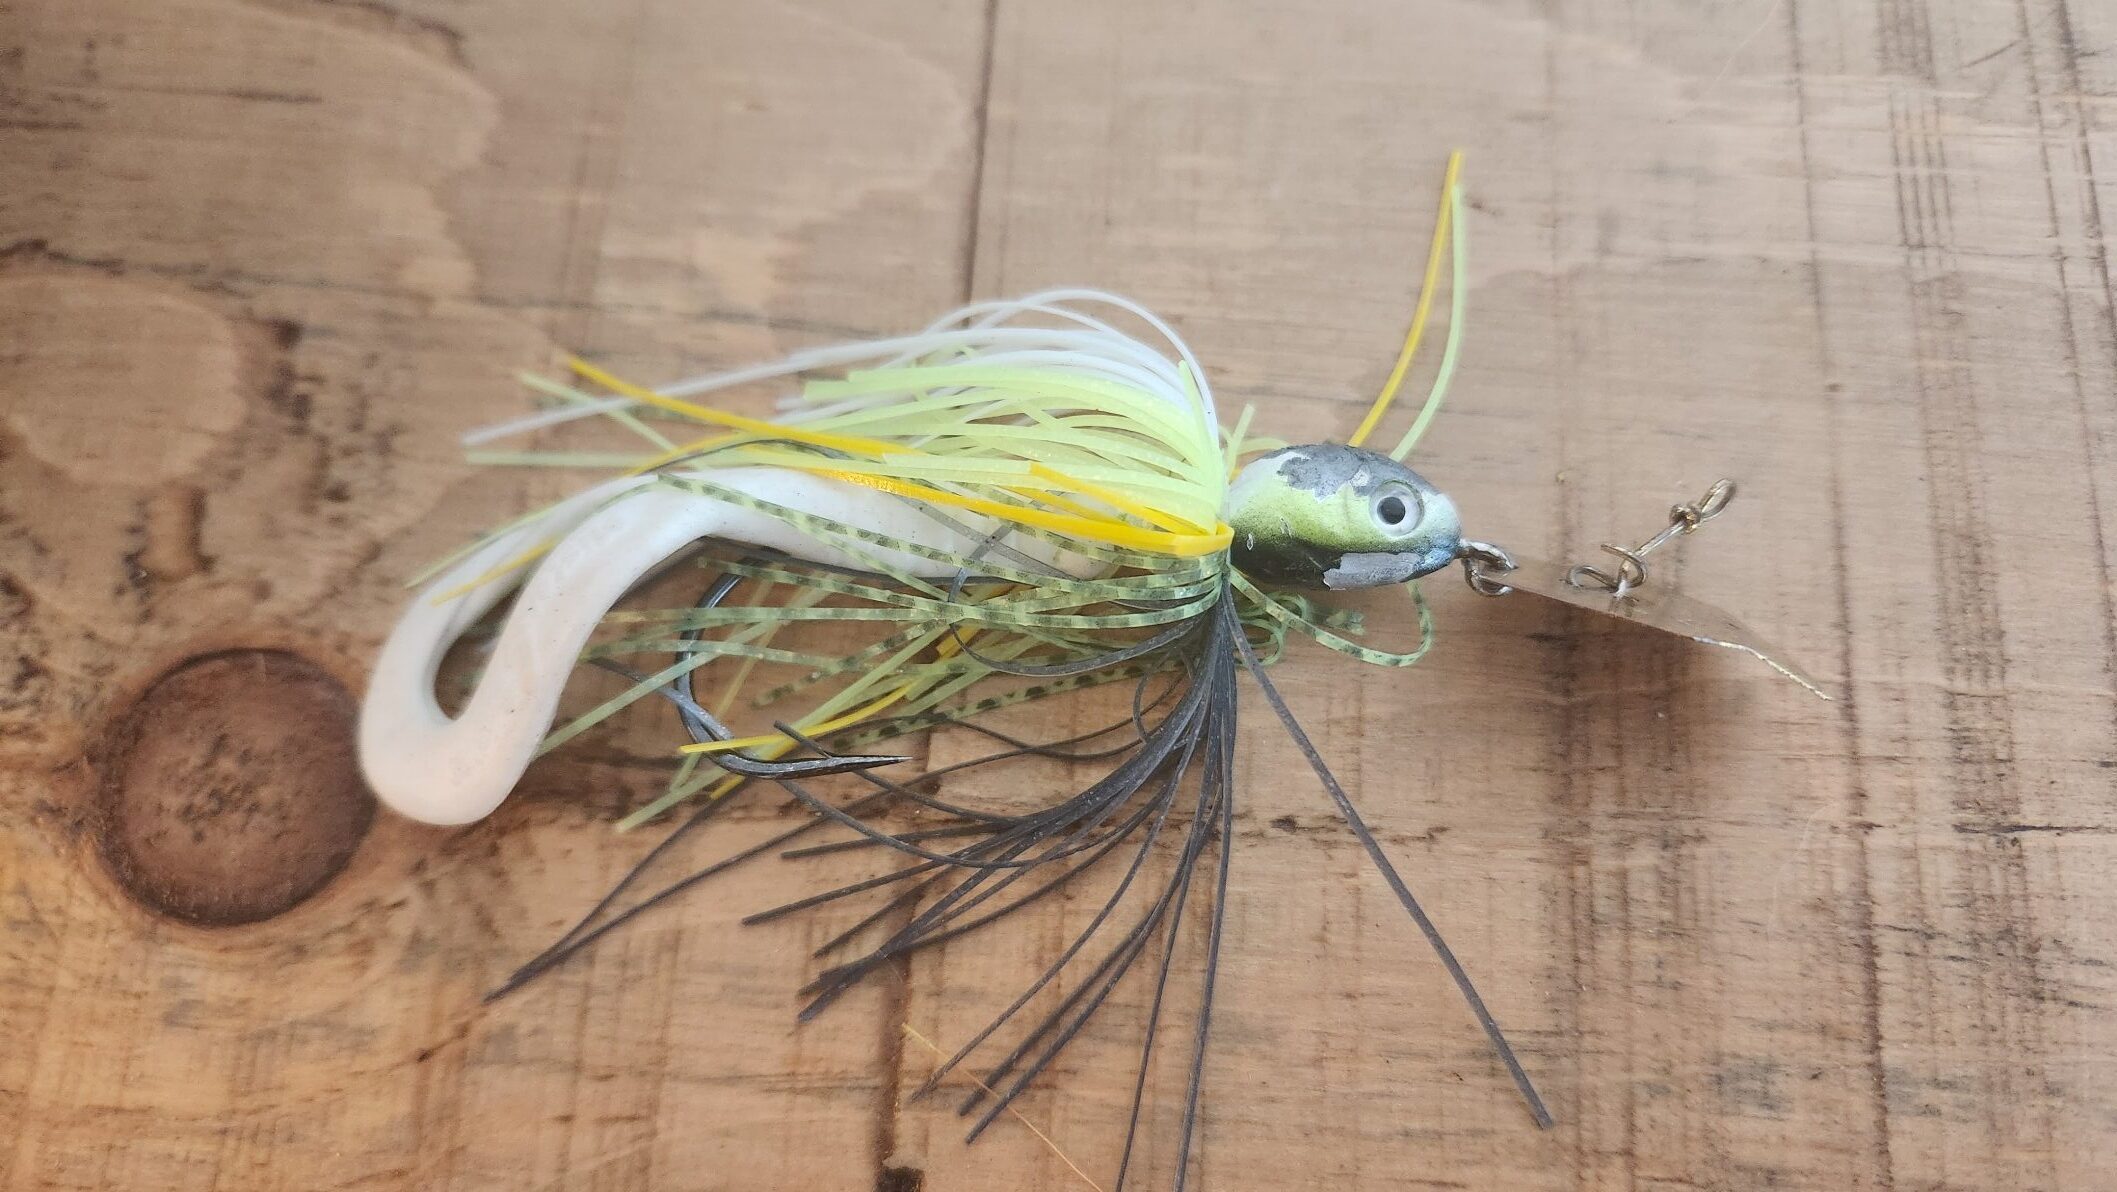 Chatterbait-style jig. Ideal for bass and pike fishing.